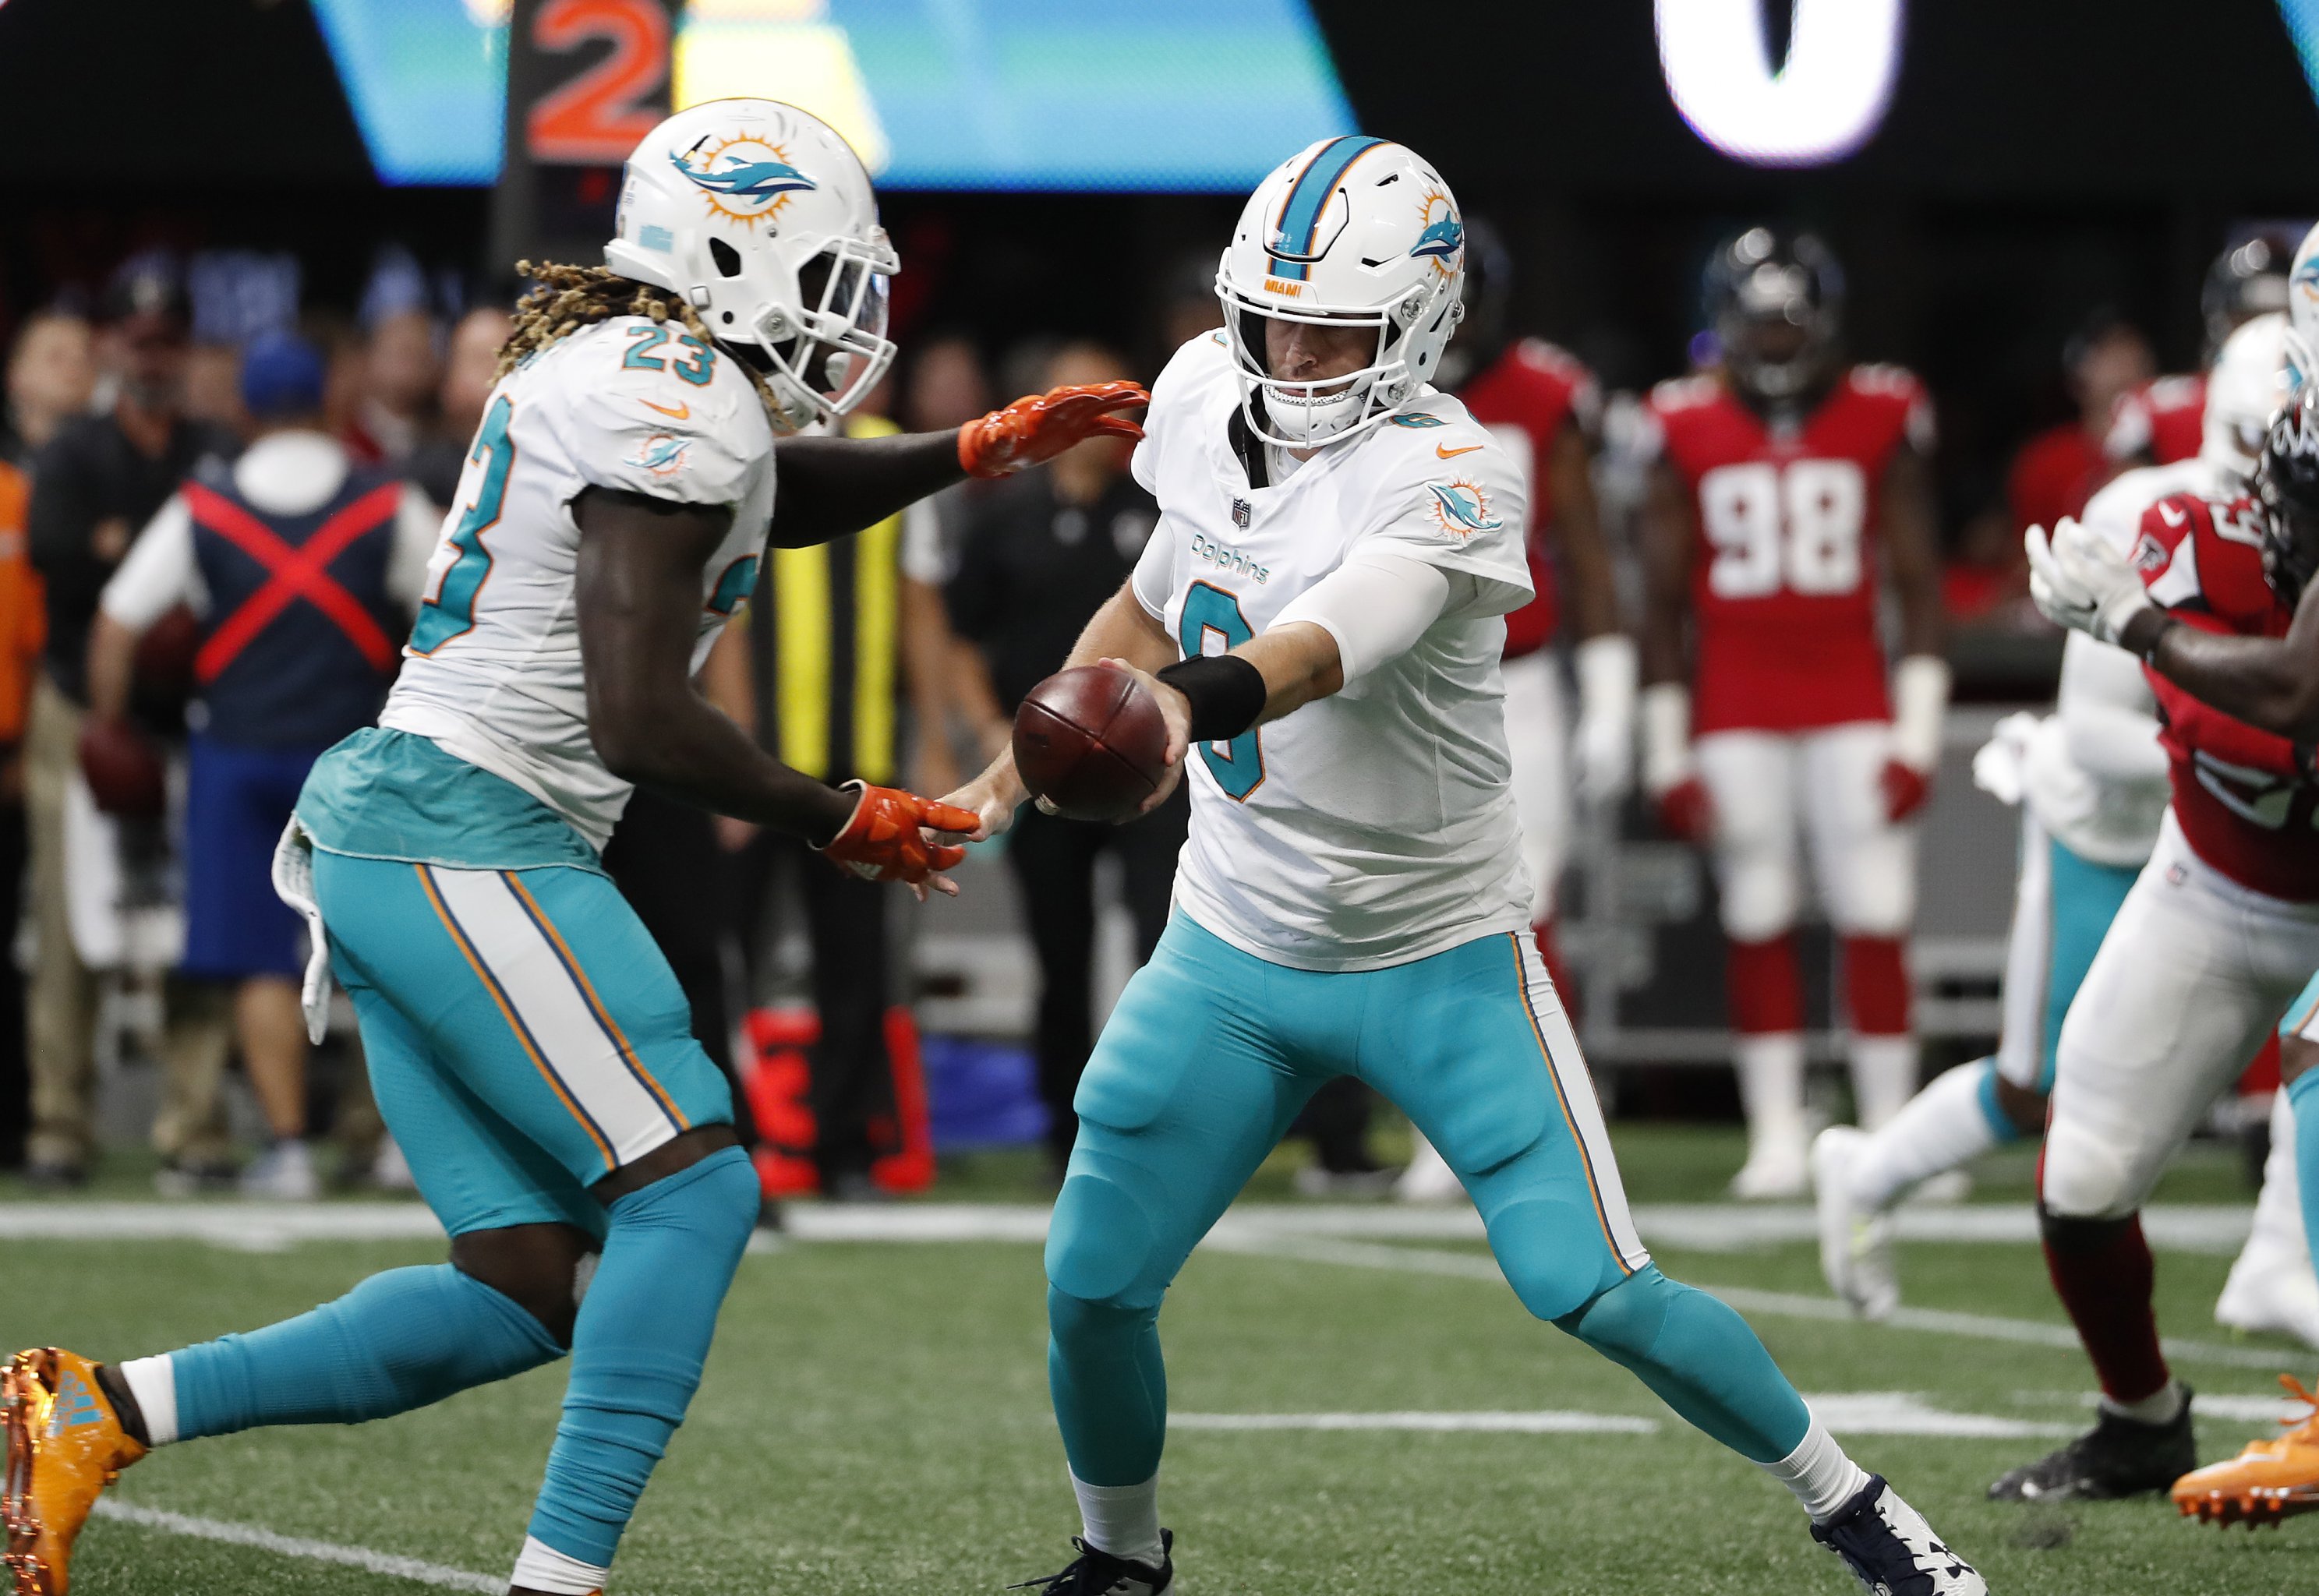 The Miami Dolphins Baltimore Ravens game was a buffet of emotions